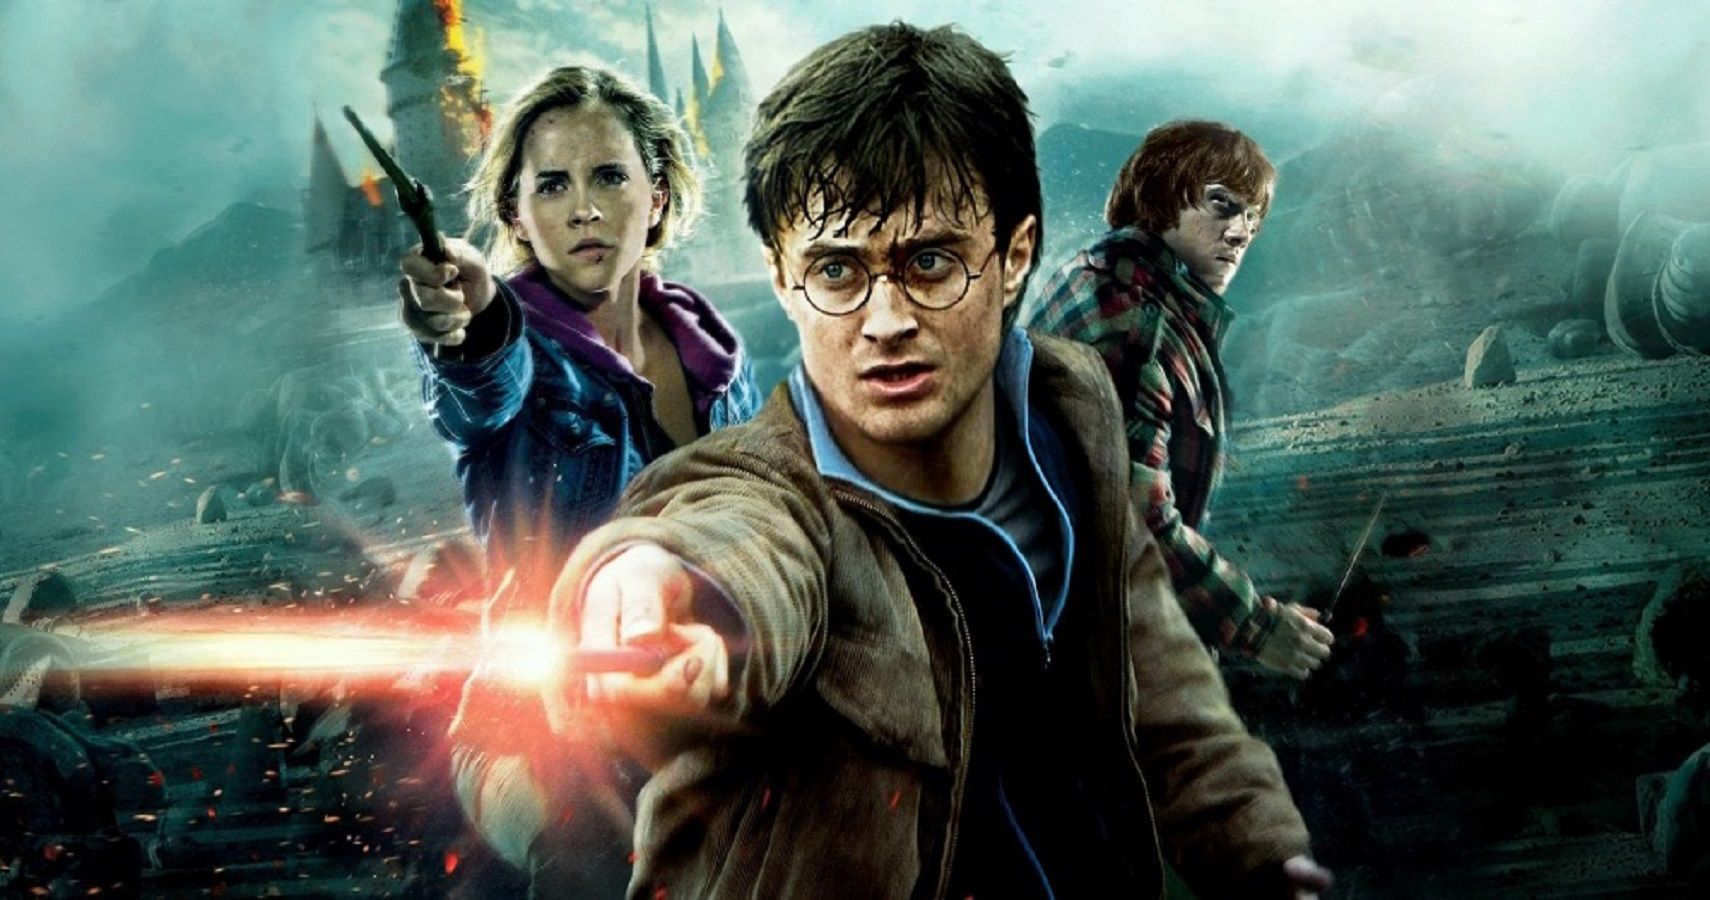 The 10 Best Quotes From Harry Potter And The Deathly Hallows Part 2